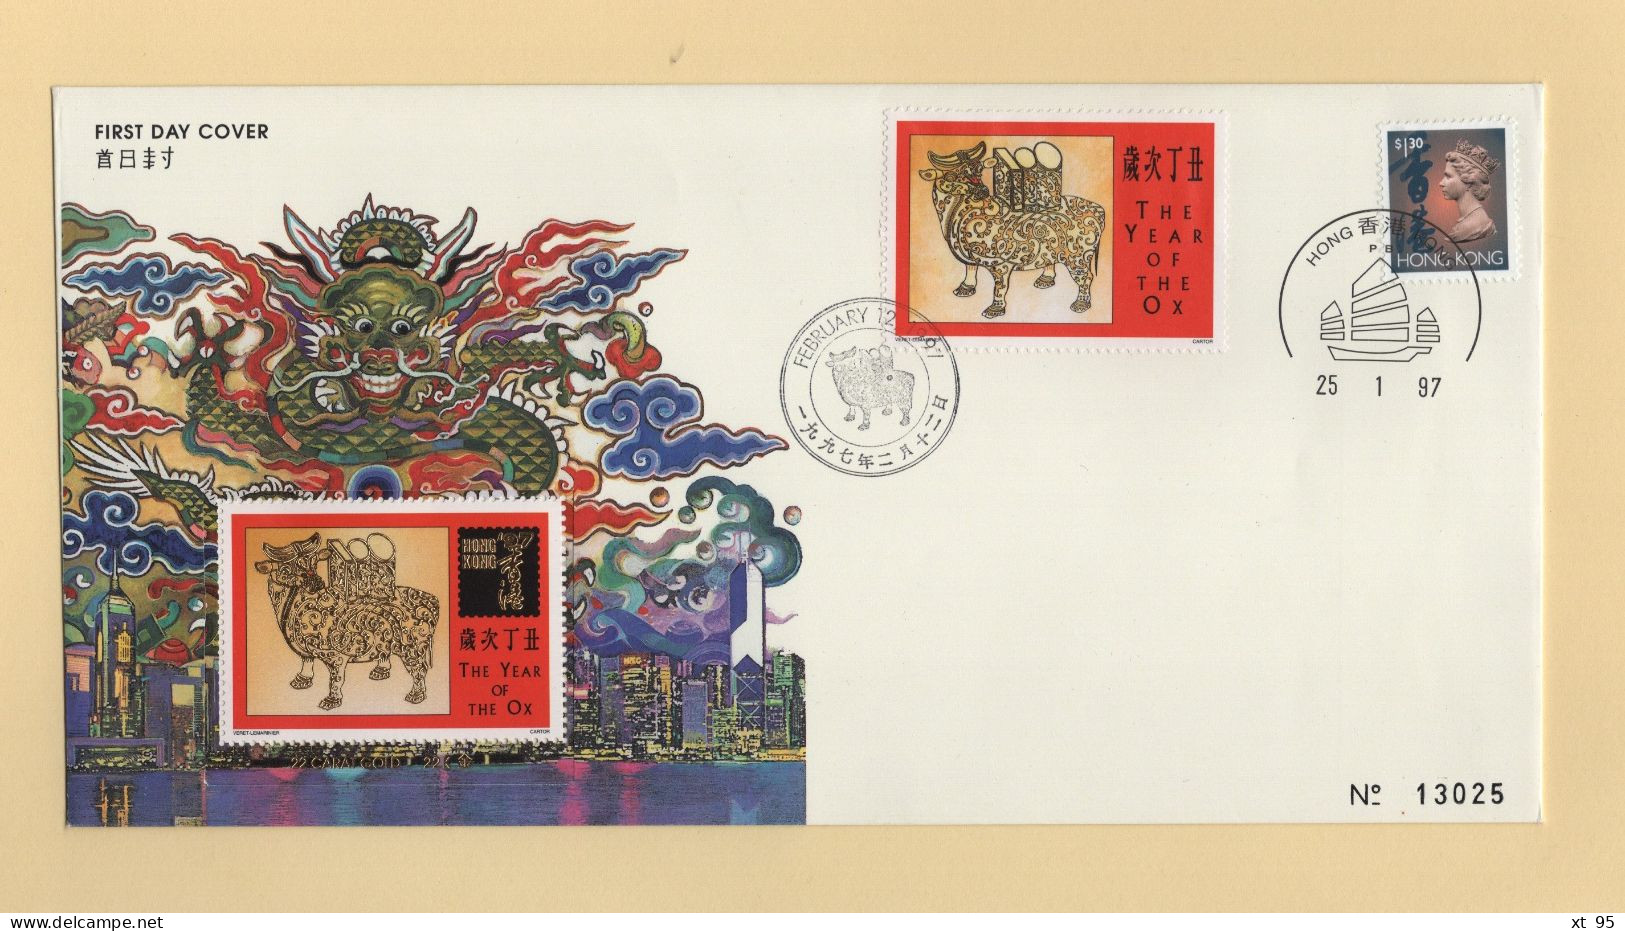 Hong Kong - FDC - 1997 - The Year Of Ox - FDC